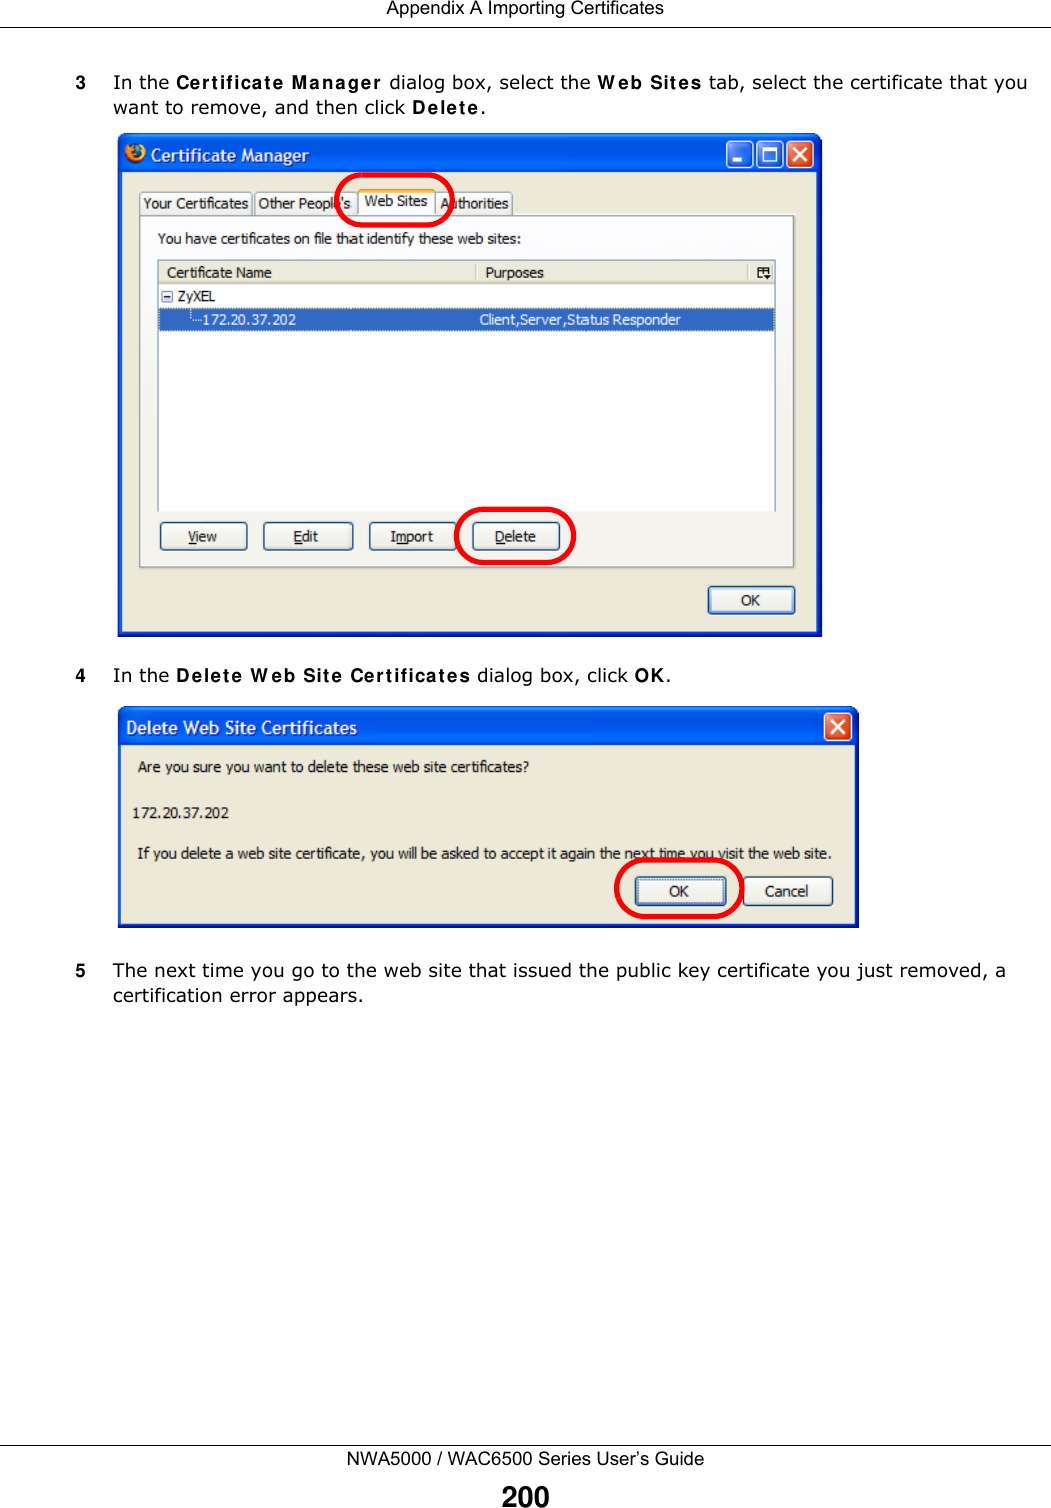 Appendix A Importing CertificatesNWA5000 / WAC6500 Series User’s Guide2003In the Cer tificat e Ma nager  dialog box, select the W e b Sit e s tab, select the certificate that you want to remove, and then click D e le t e .4In the De le t e  W eb Sit e Cert ificat e s dialog box, click OK.5The next time you go to the web site that issued the public key certificate you just removed, a certification error appears.